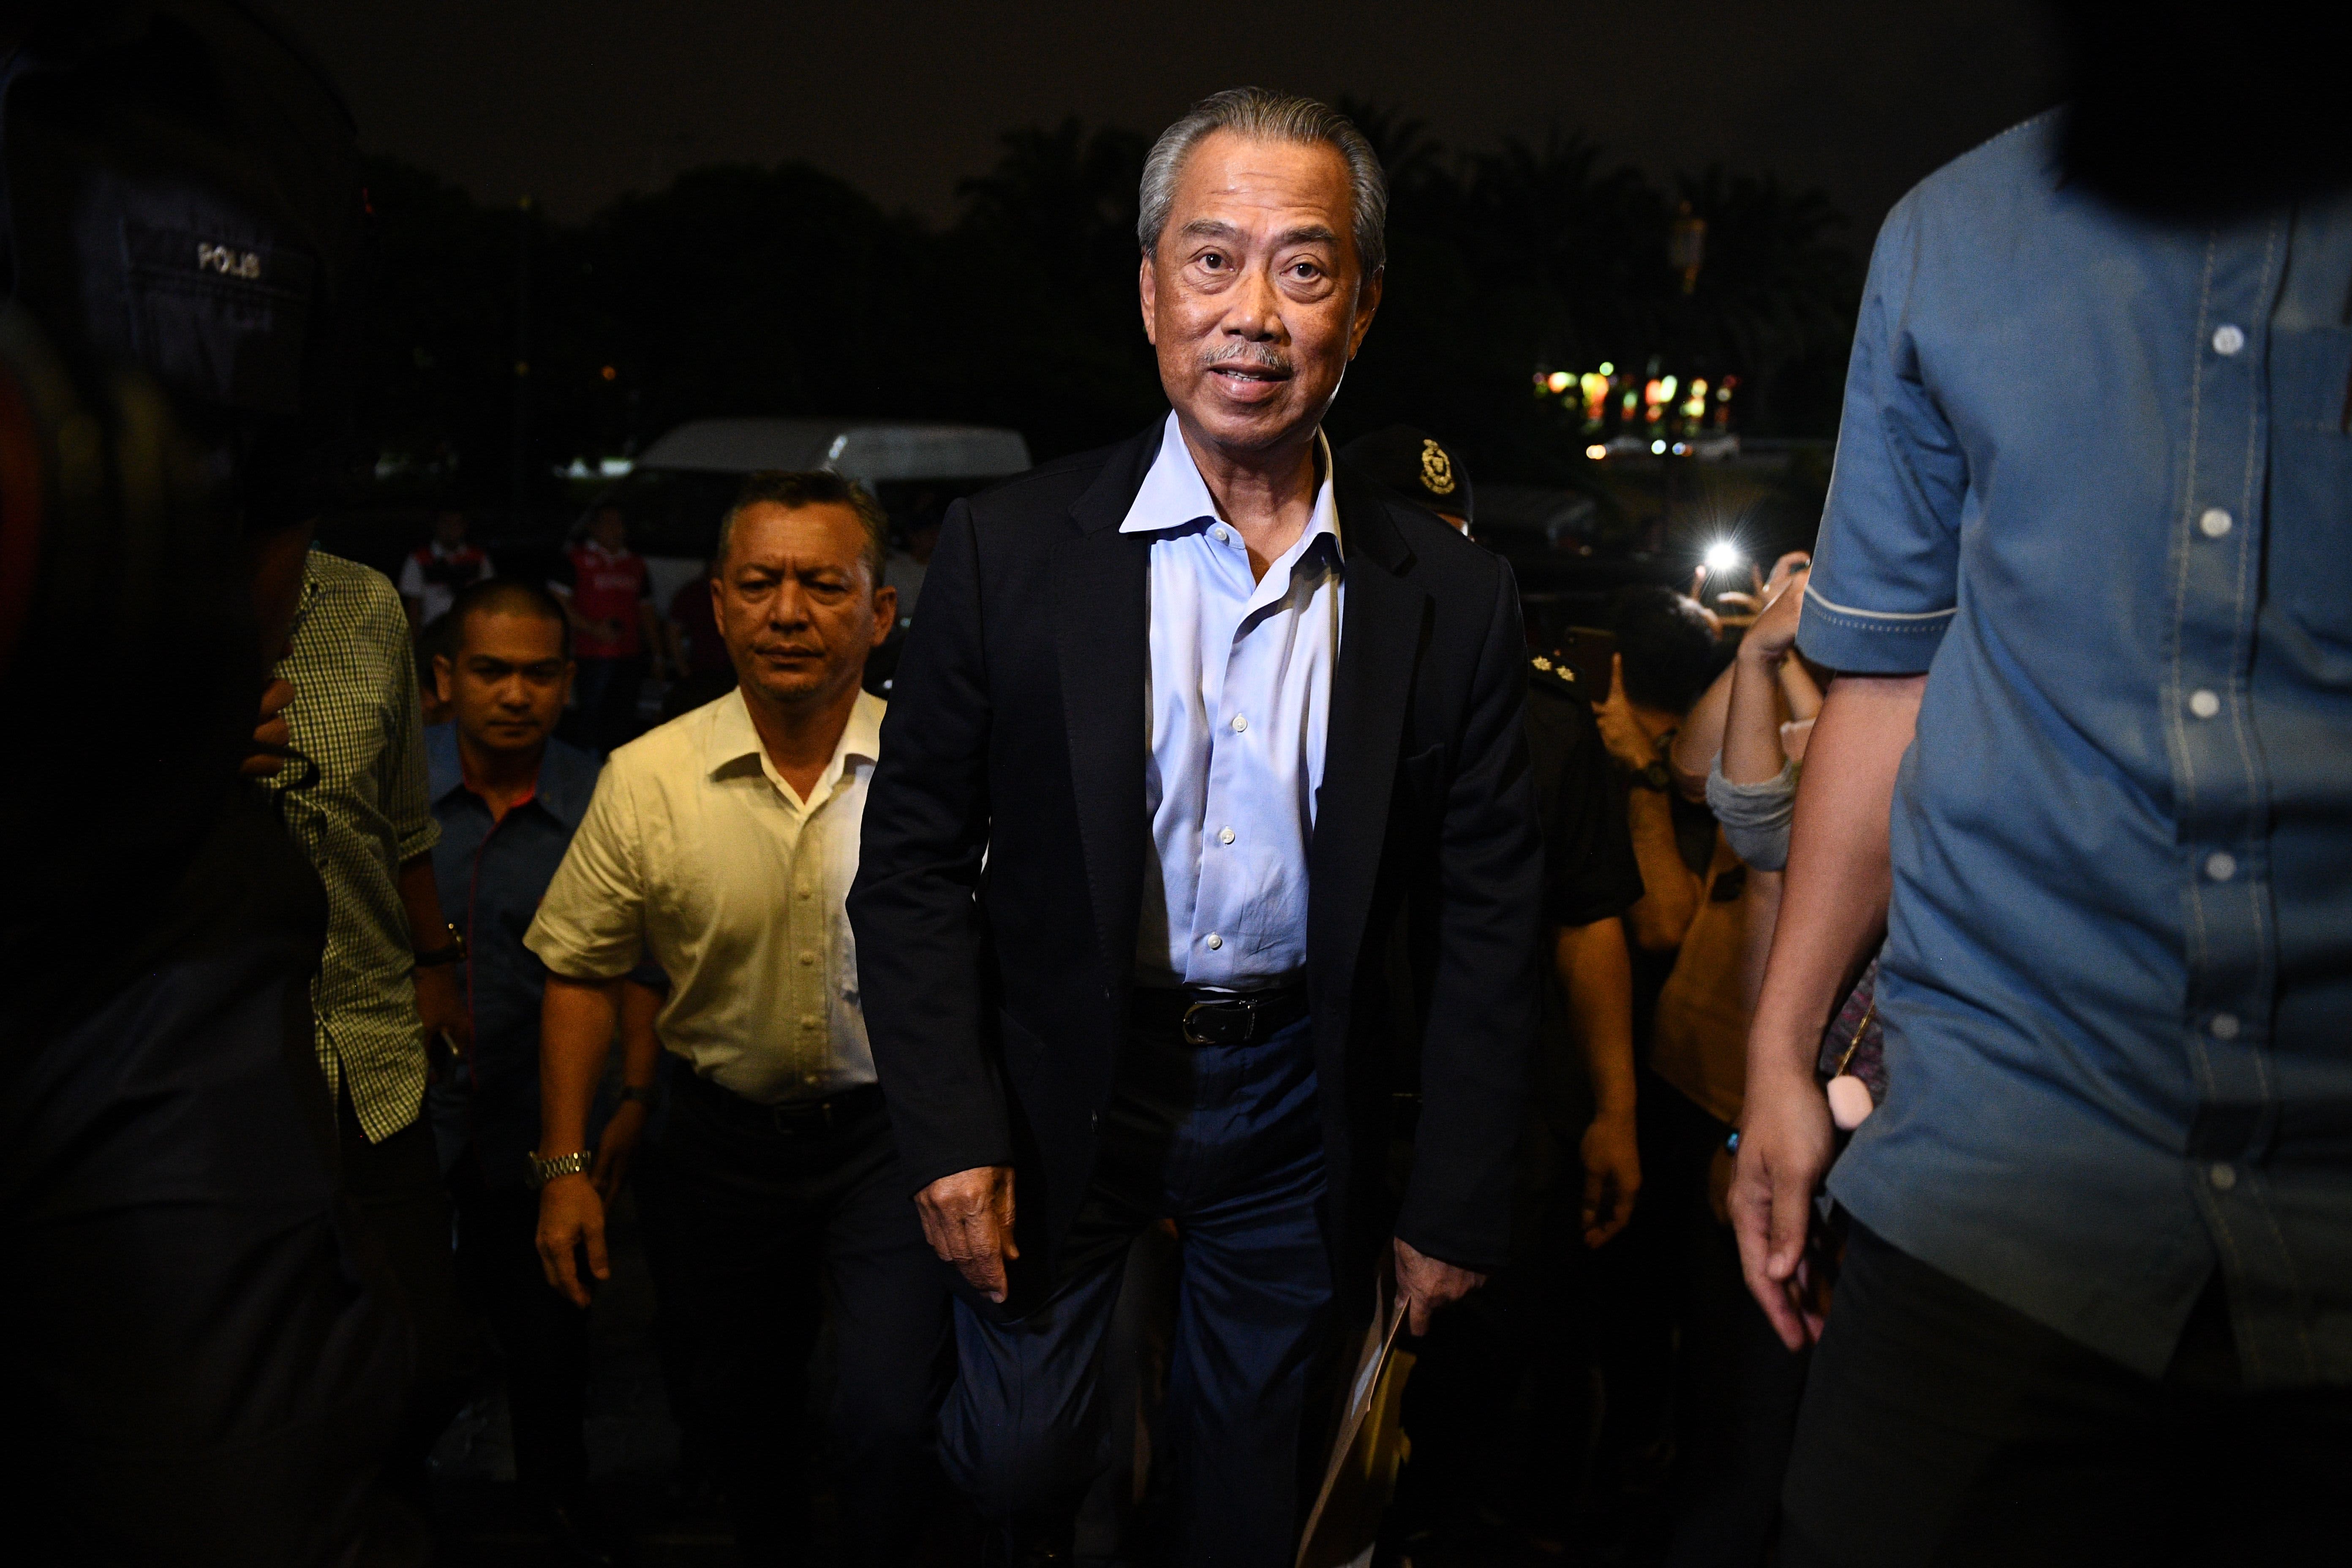 Cabinet of Malaysia's Prime Minister Muhyiddin Yassin resigns, says minister